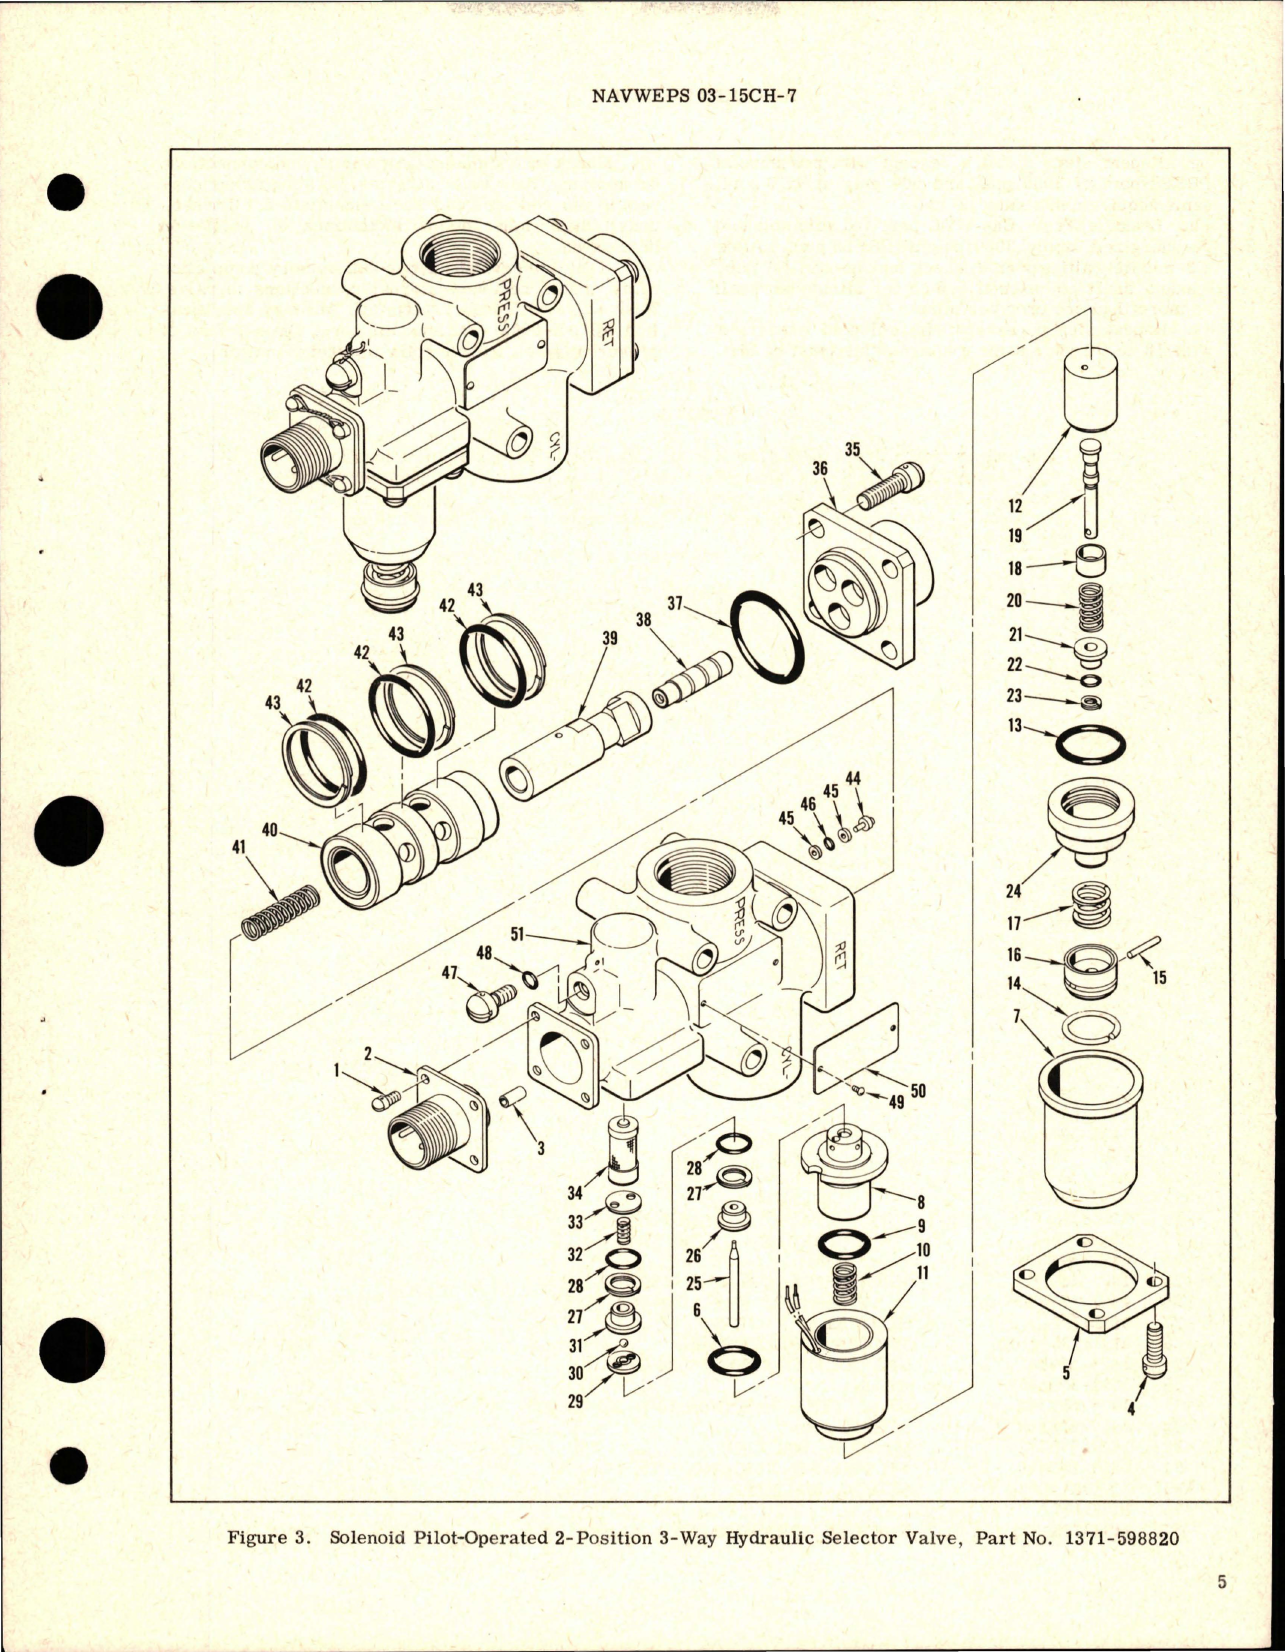 Sample page 5 from AirCorps Library document: Overhaul Instructions with Parts Breakdown for Solenoid Pilot Operated 2 Position 3 Way Hydraulic Selector Valve - Part 1371-598820